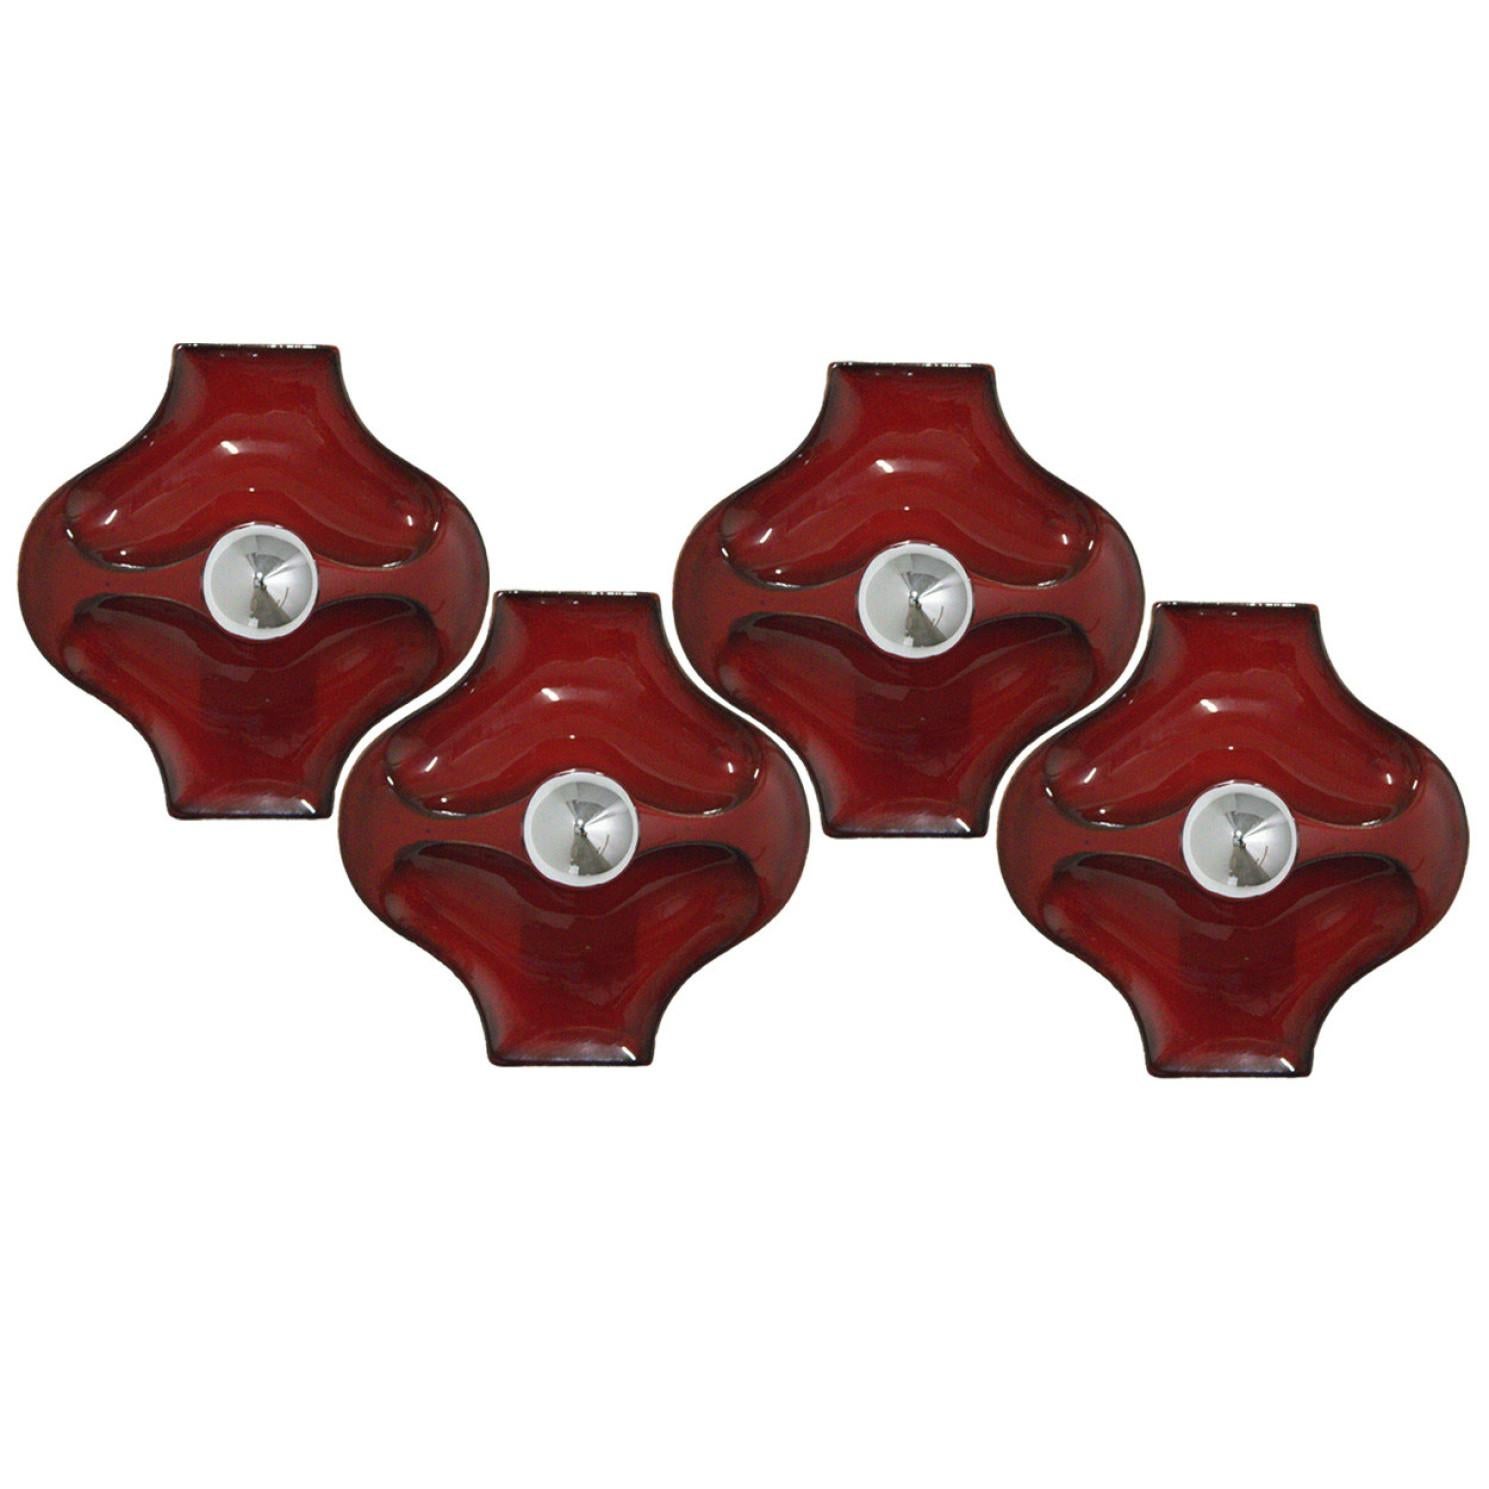 Red ceramic wall lights. Manufactured by Hustadt Leuchten Keramik, Germany in the 1970s.
The glaze is in red. We used silver mirror light bulbs (see images), but soft gold clear or gold mirror light bulbs are also very